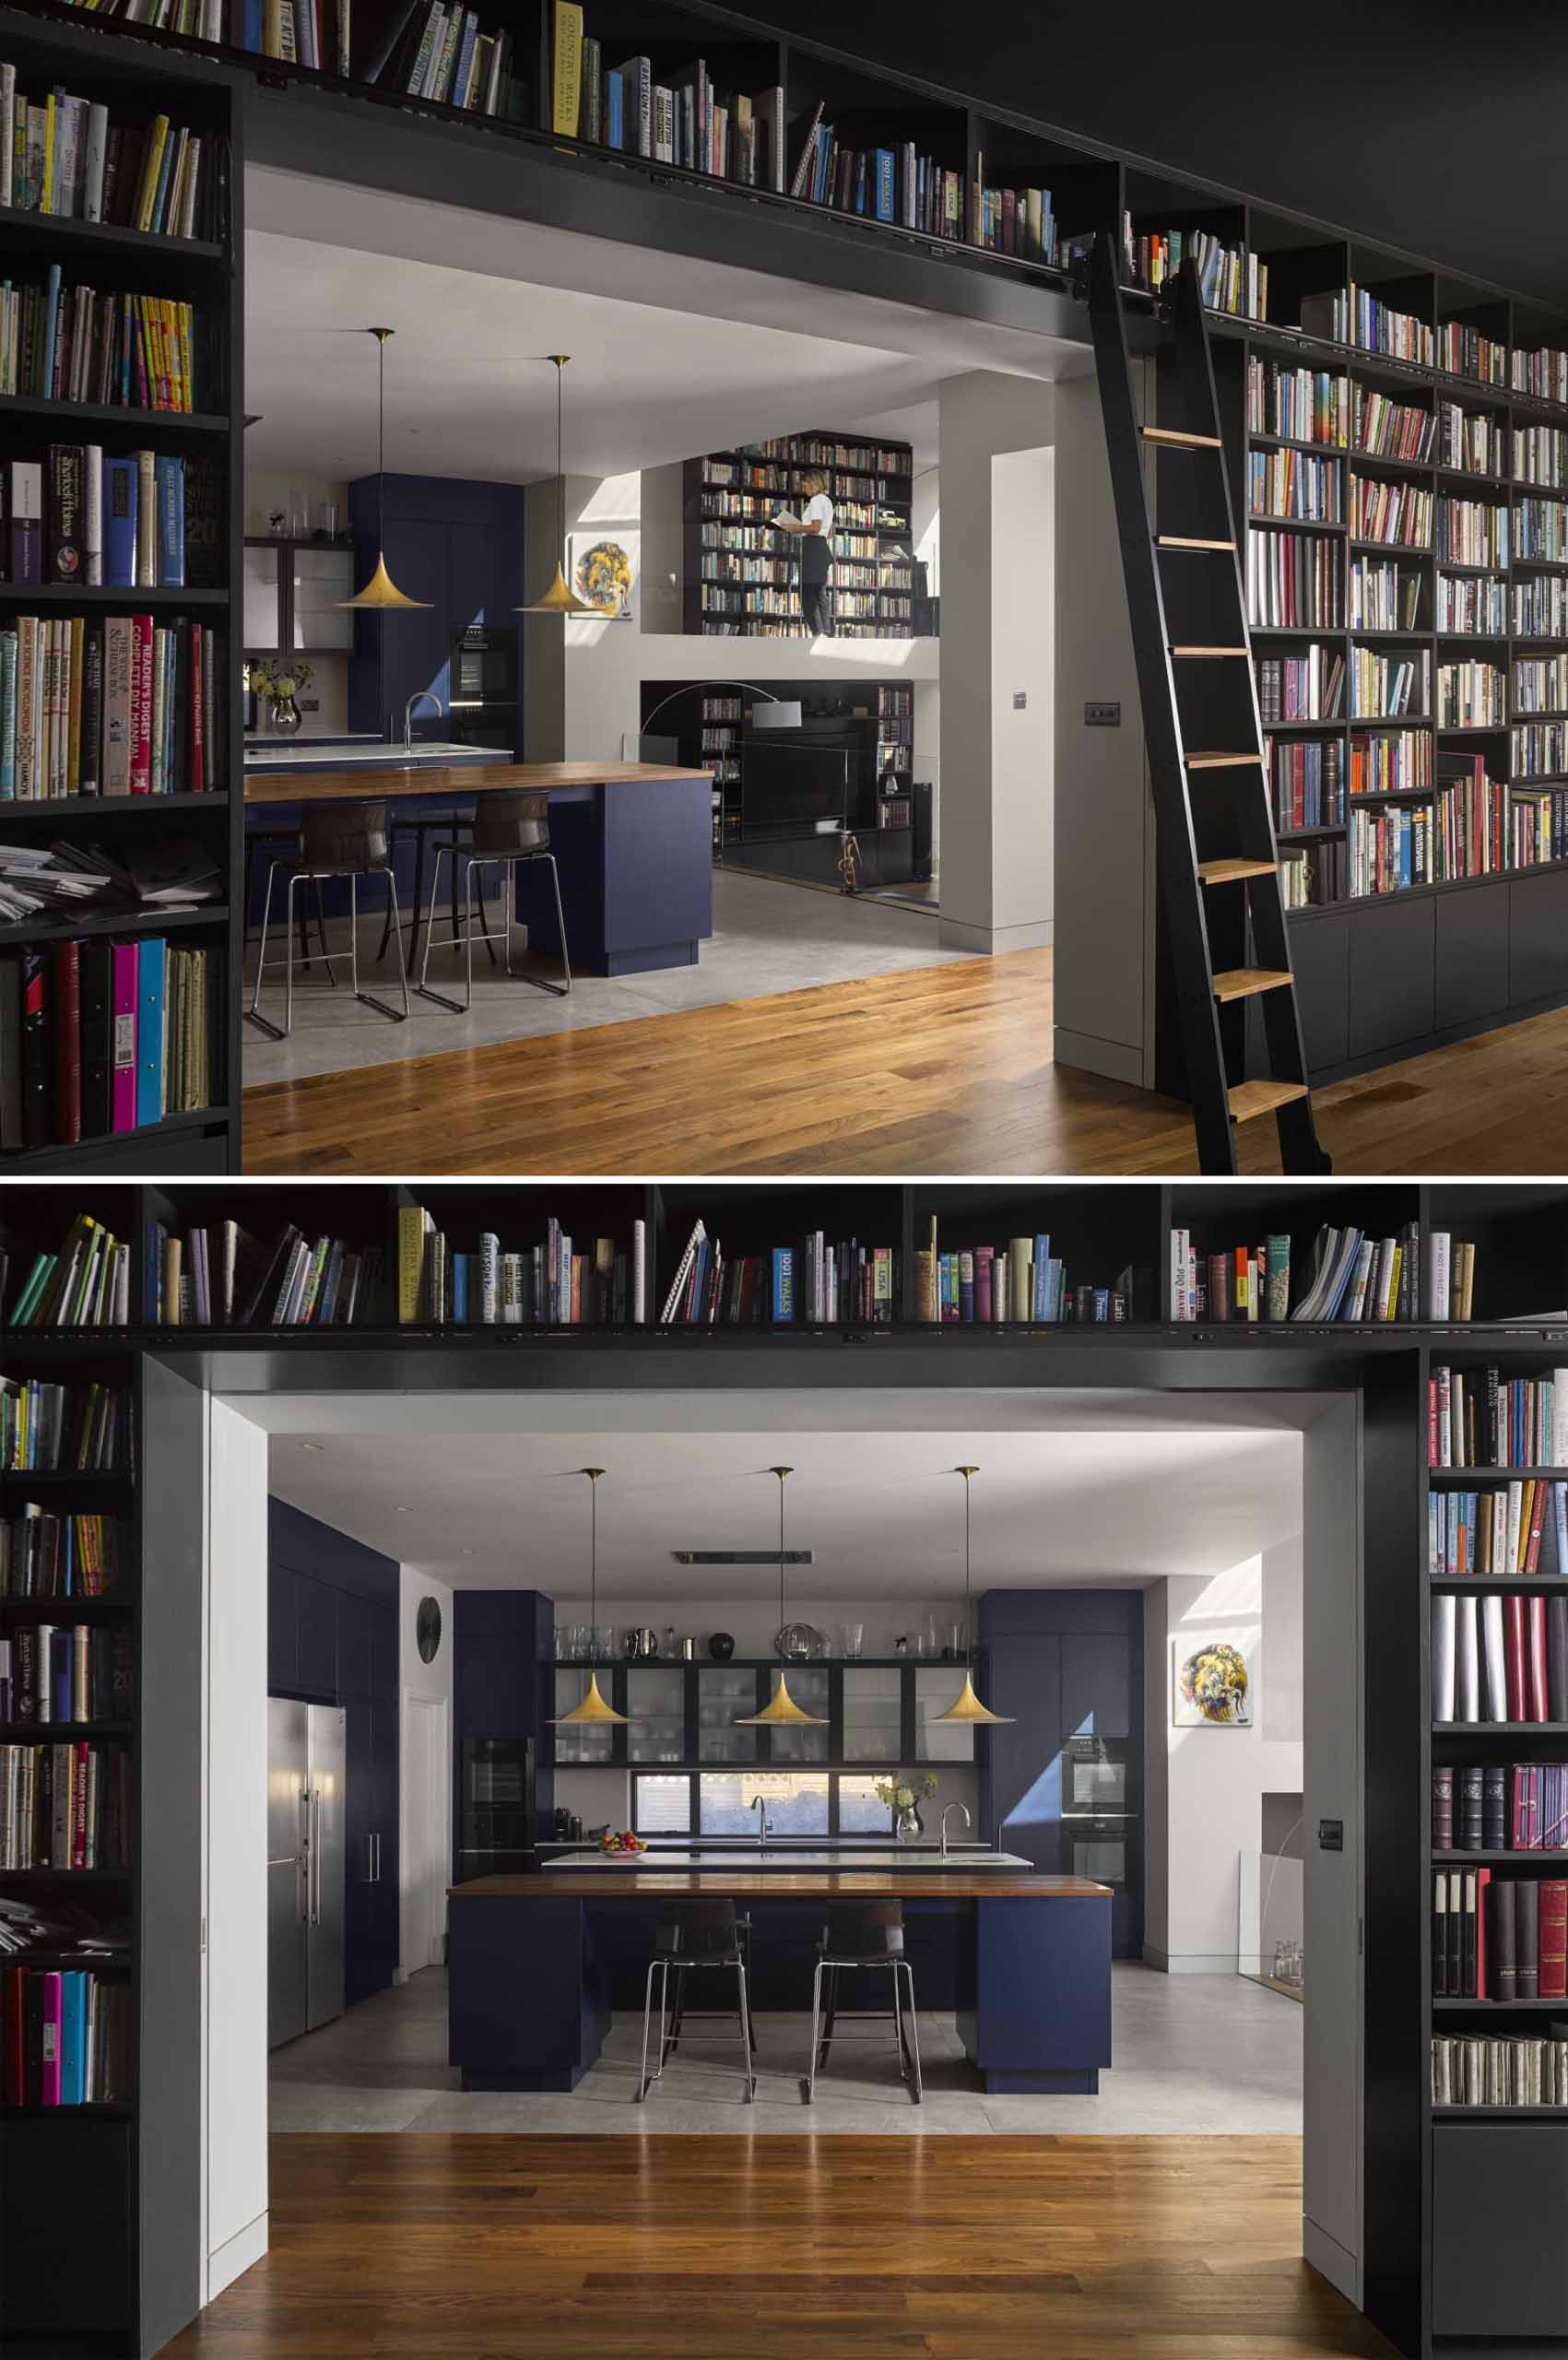 A dark blue kitchen and an interior filled with books.